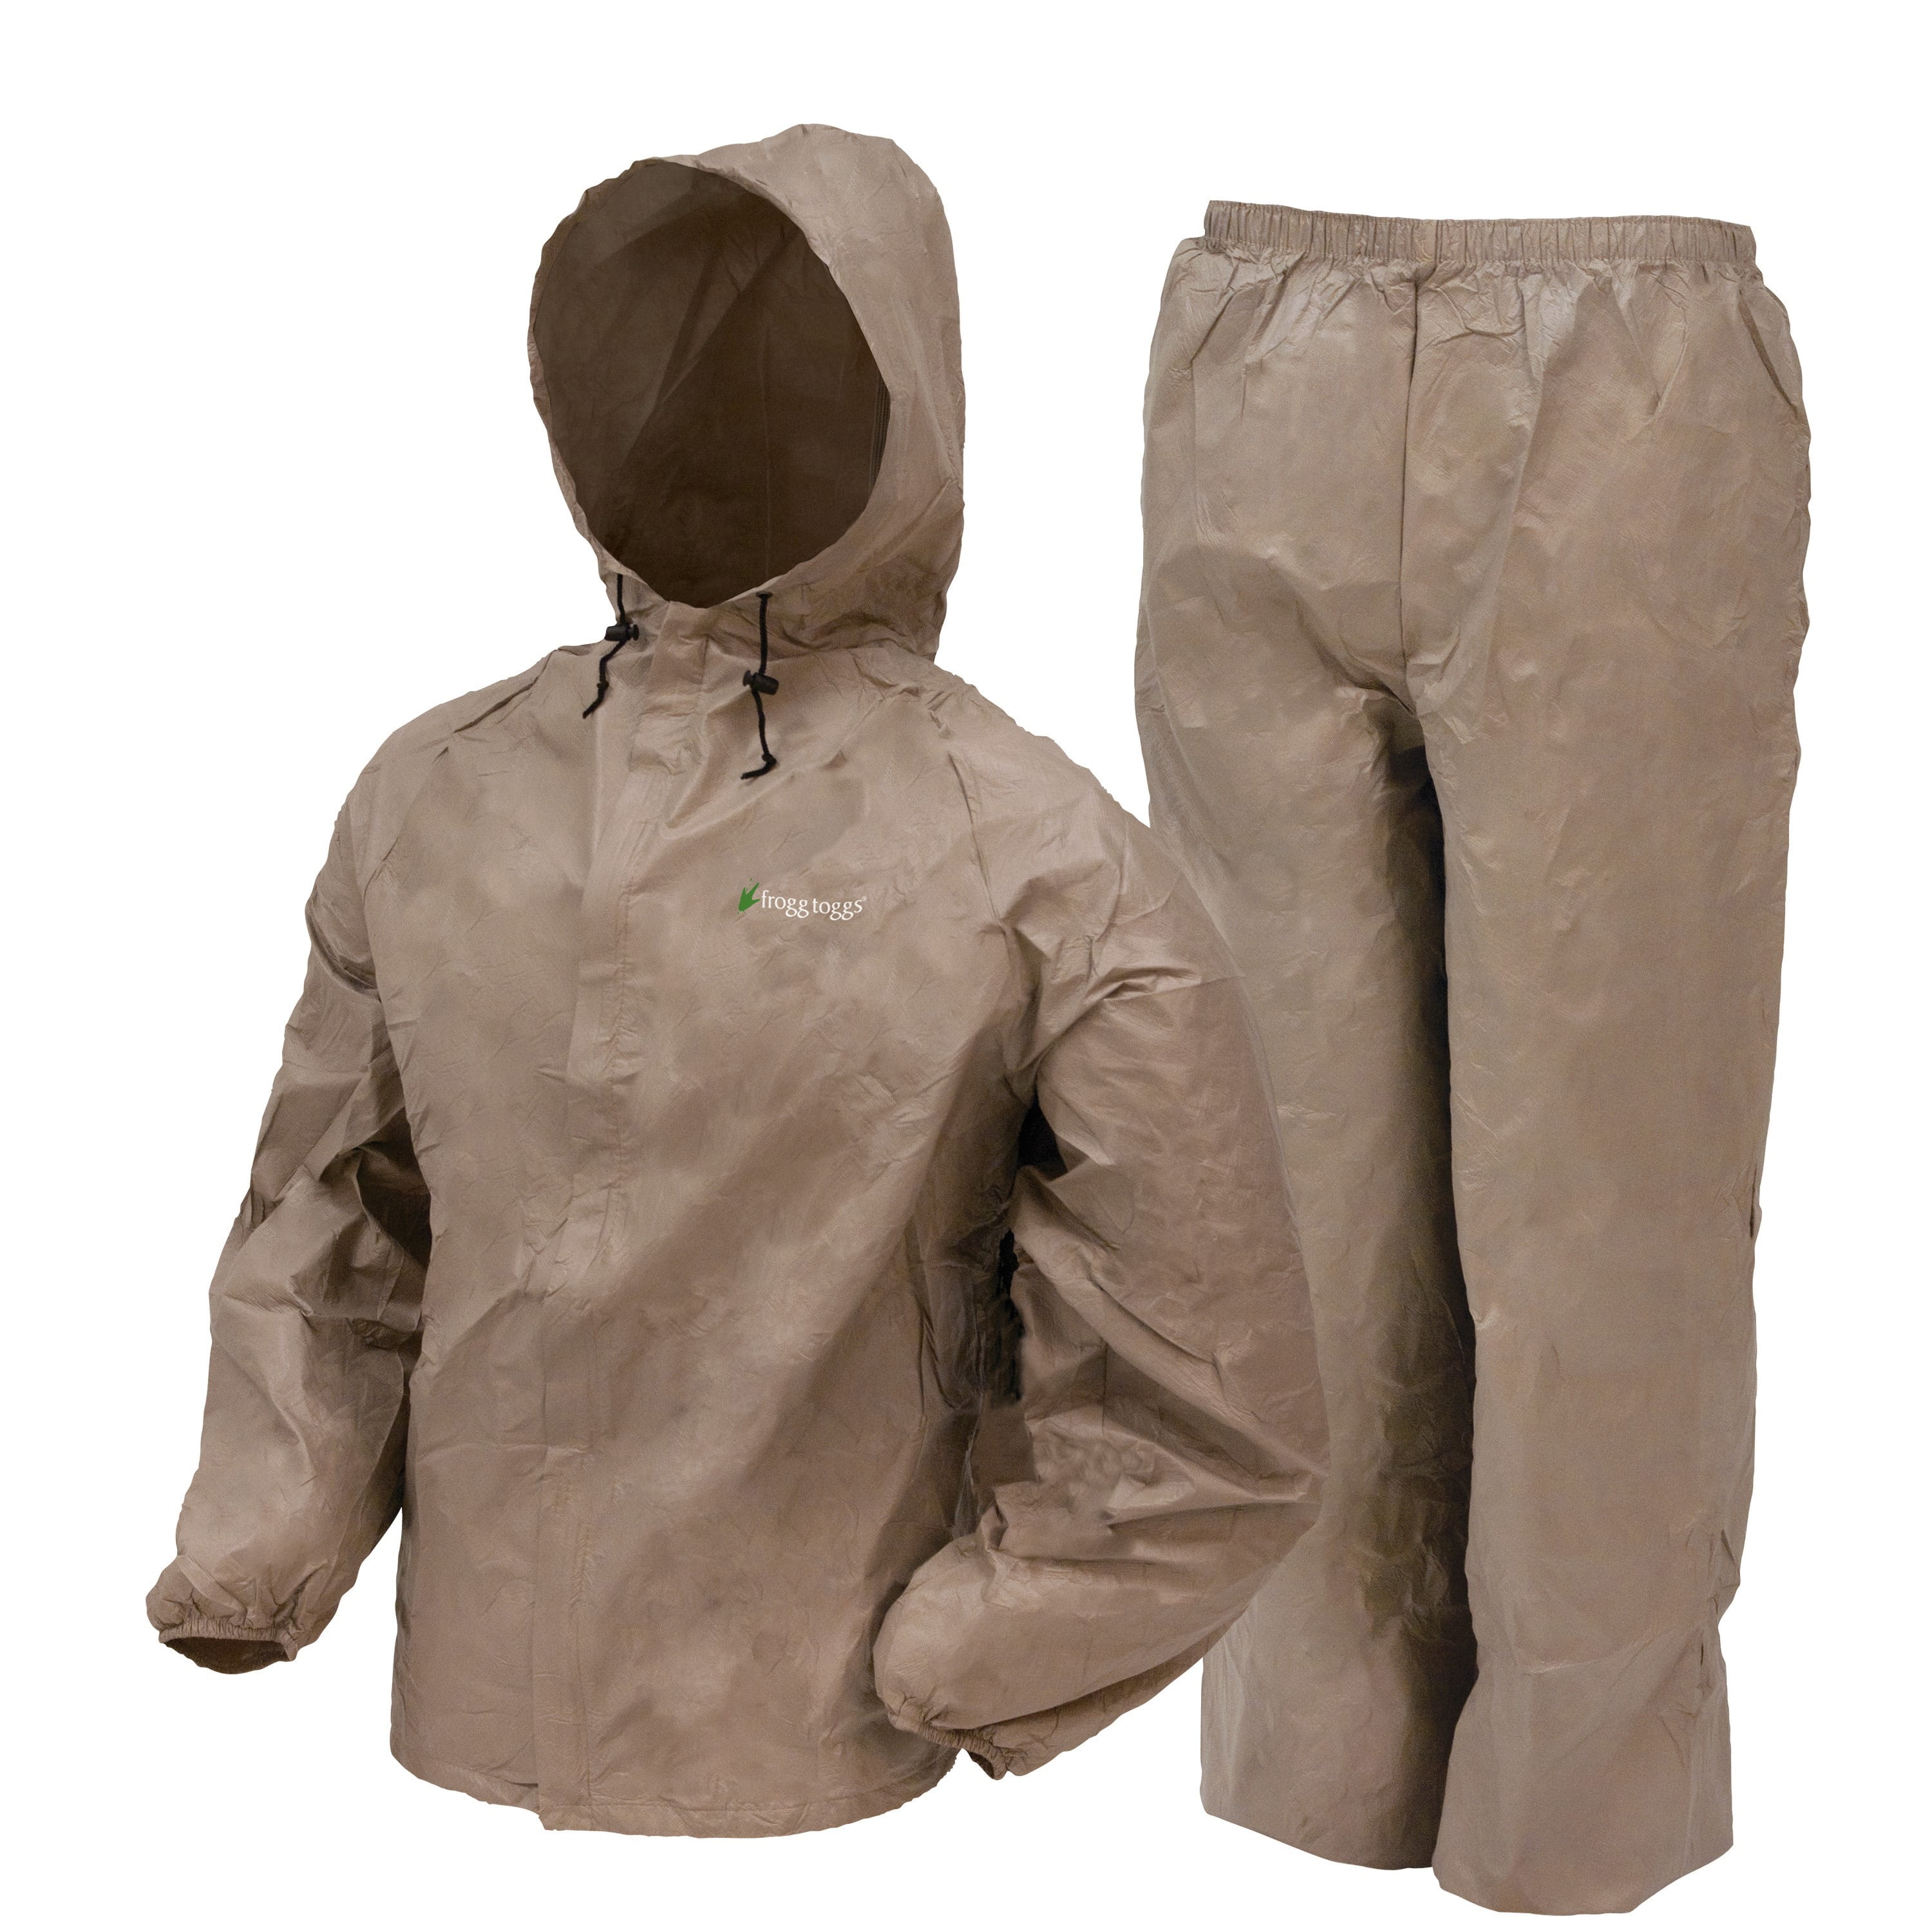 FROGG TOGGS Ultra-Lite2 Waterproof Breathable Poncho